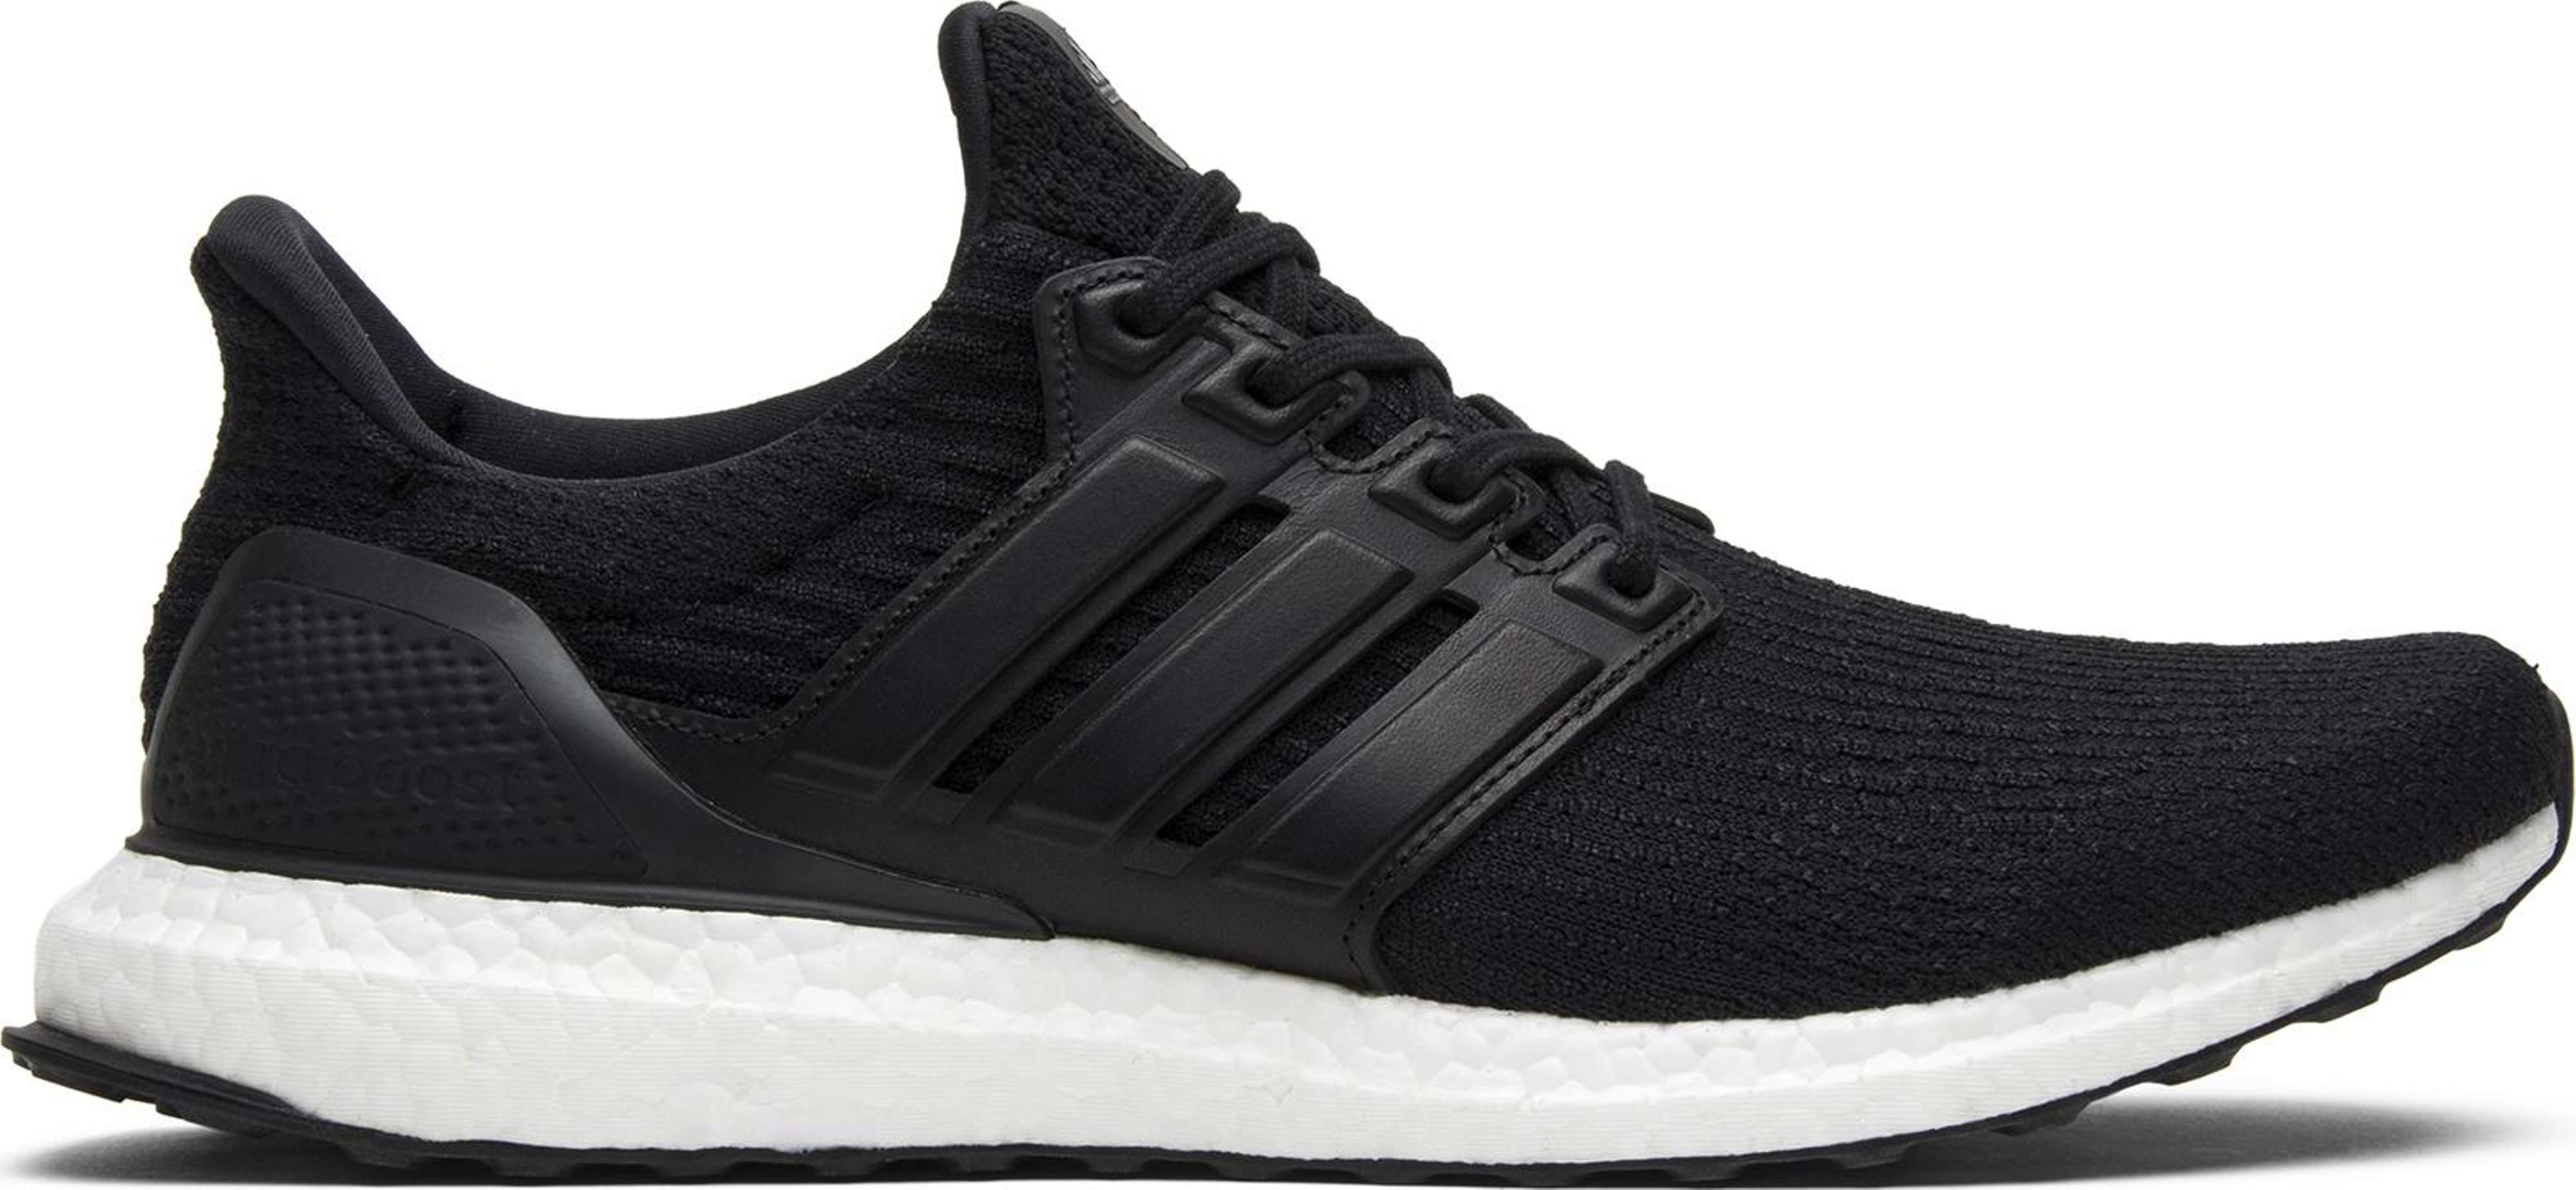 Buy UltraBoost 3.0 Limited 'Leather Cage' - BA8924 | GOAT